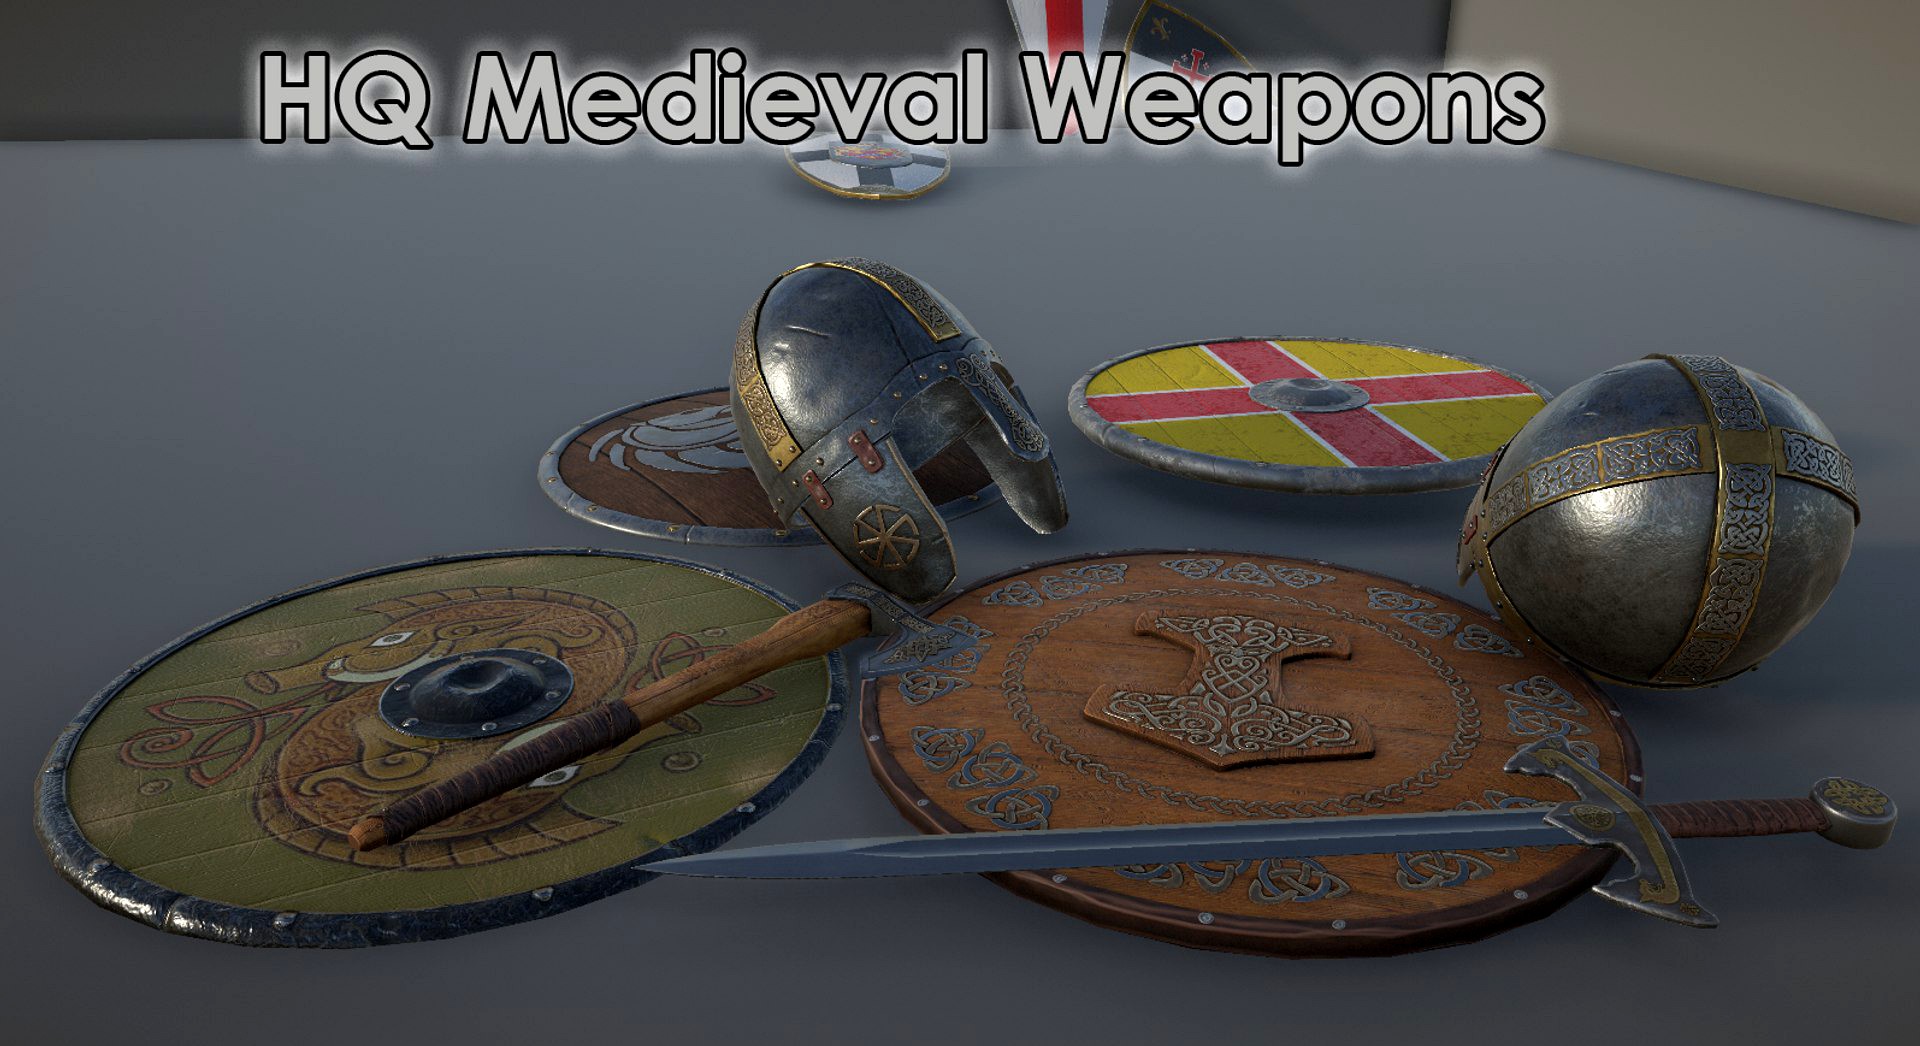 HQ Medieval Weapons